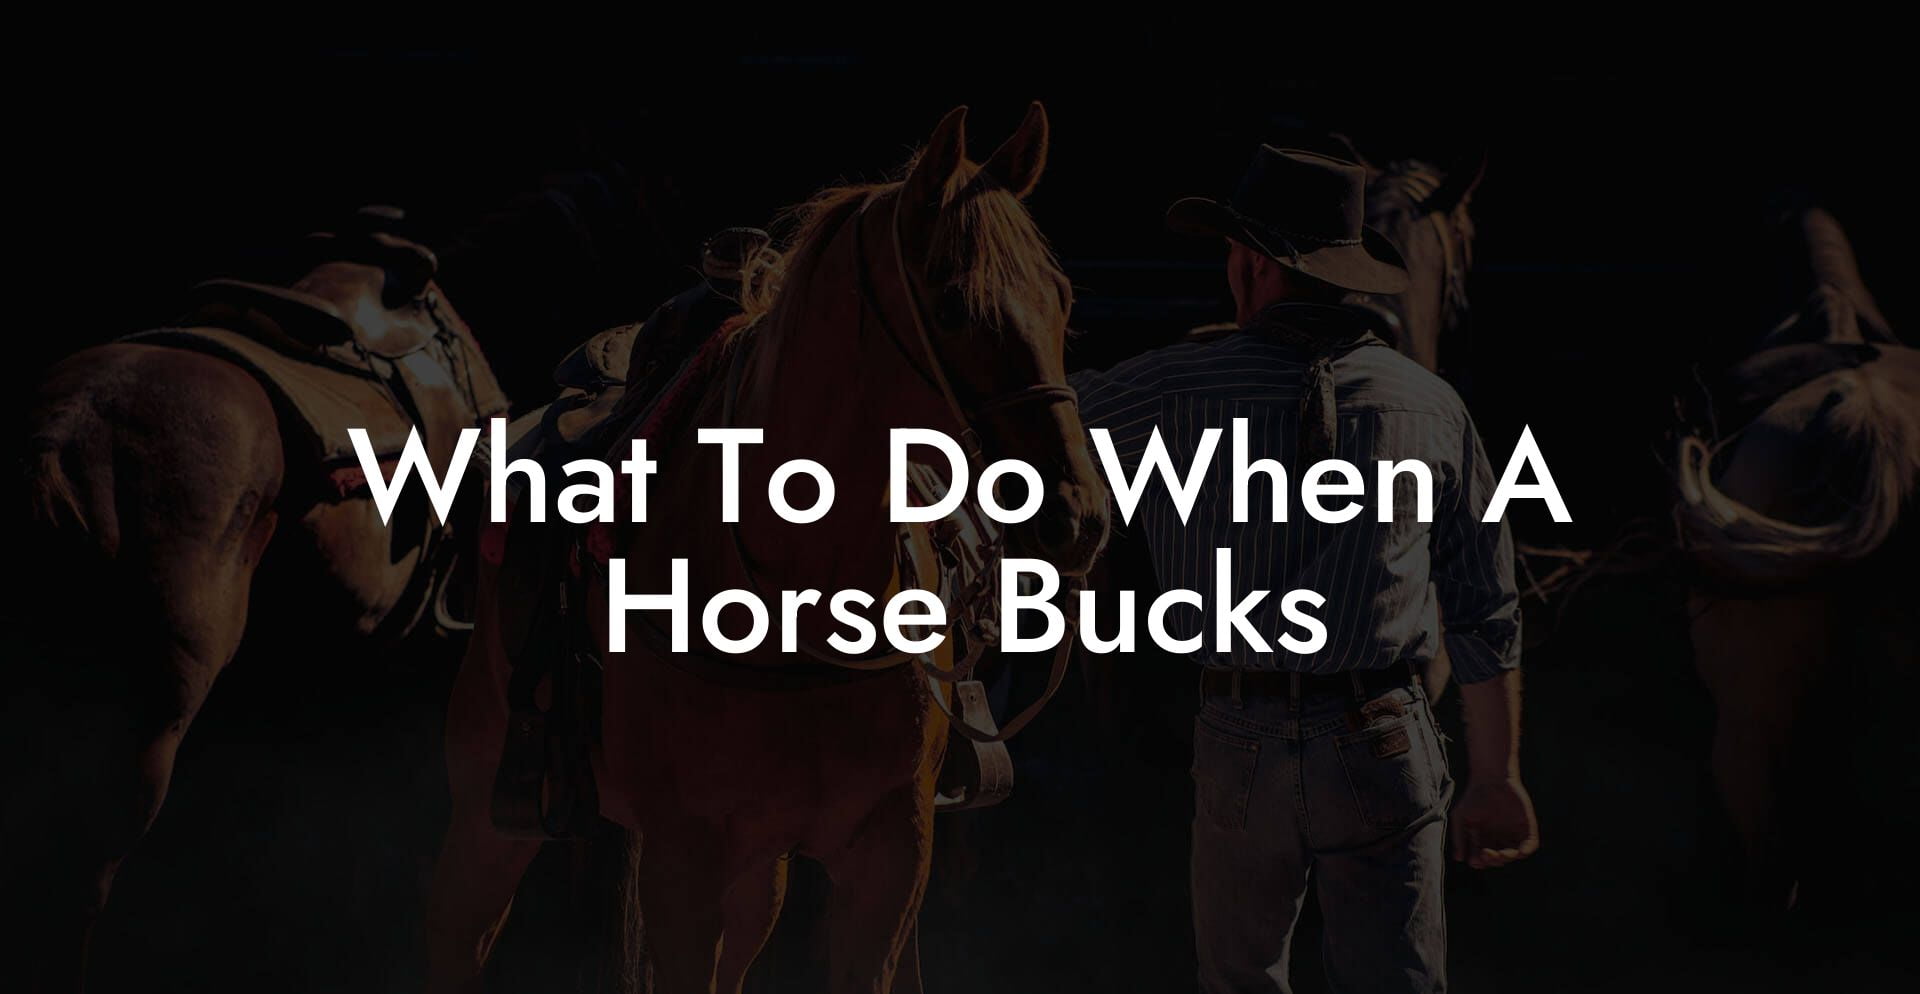 What To Do When A Horse Bucks